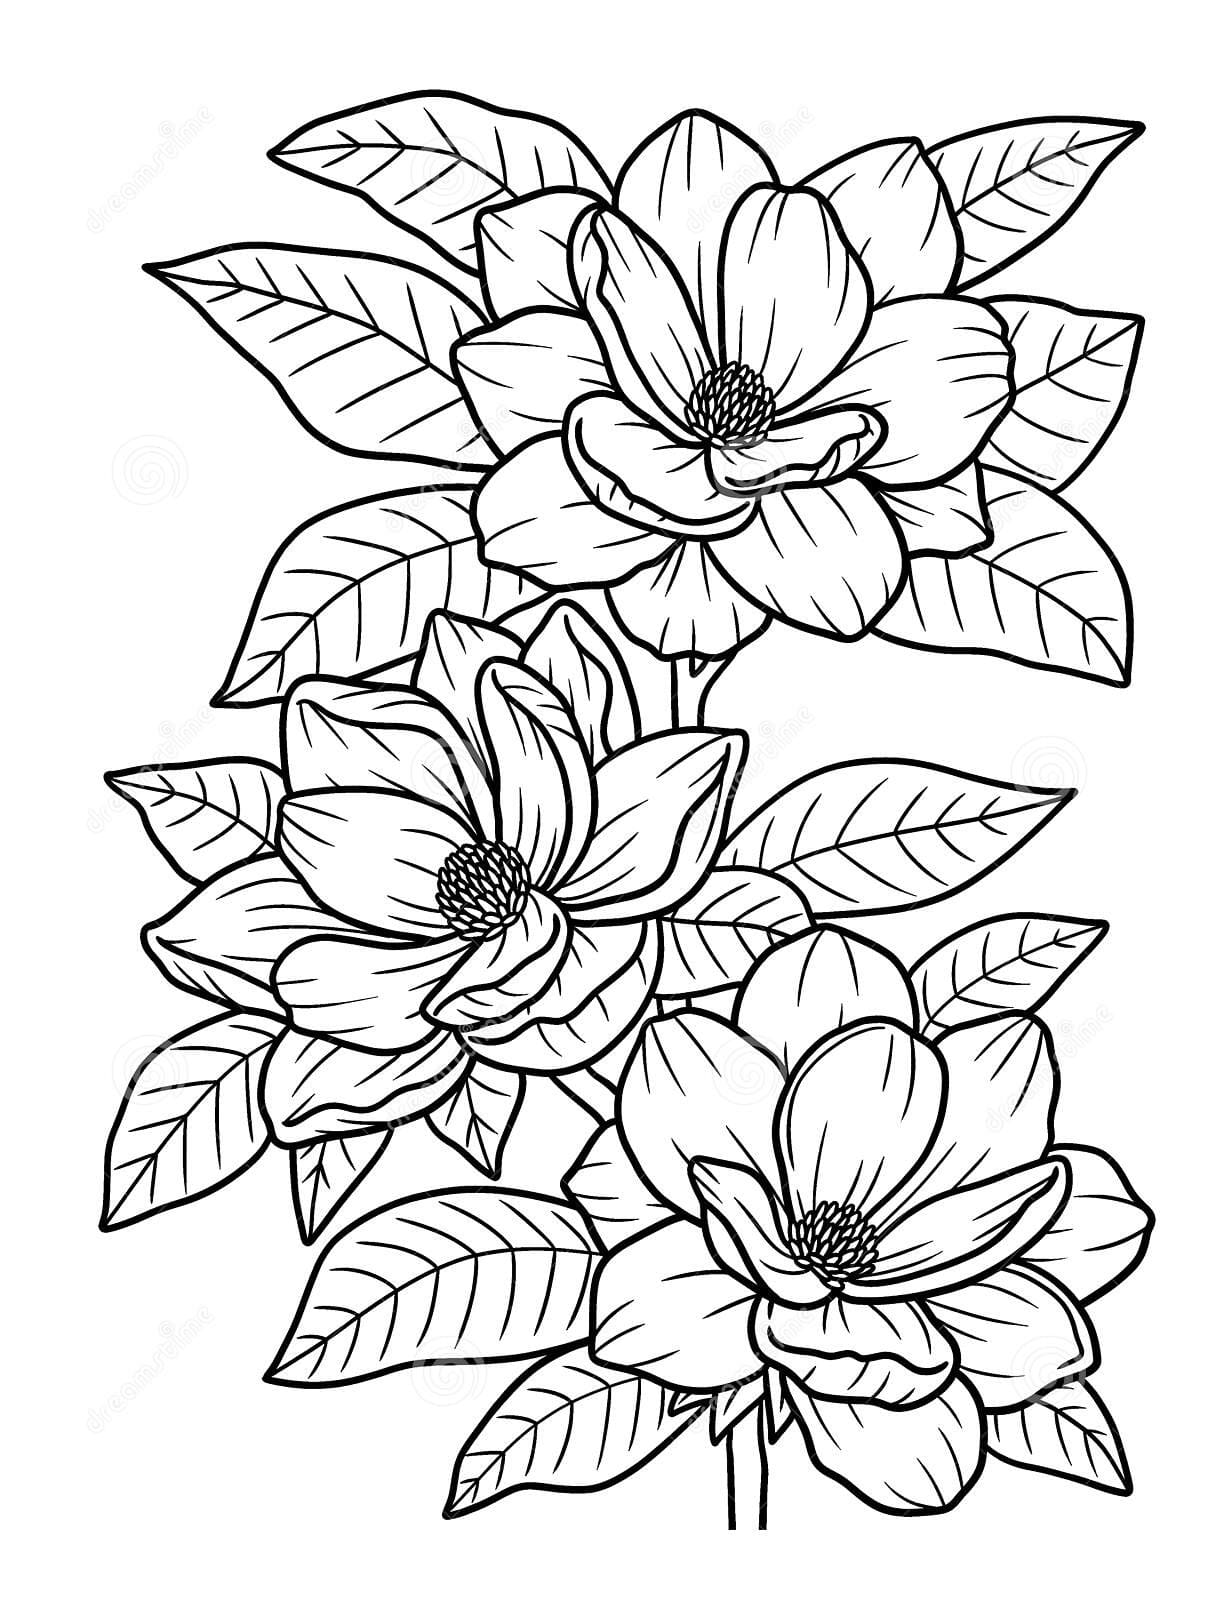 Magnolia Flower Coloring Page for Adults